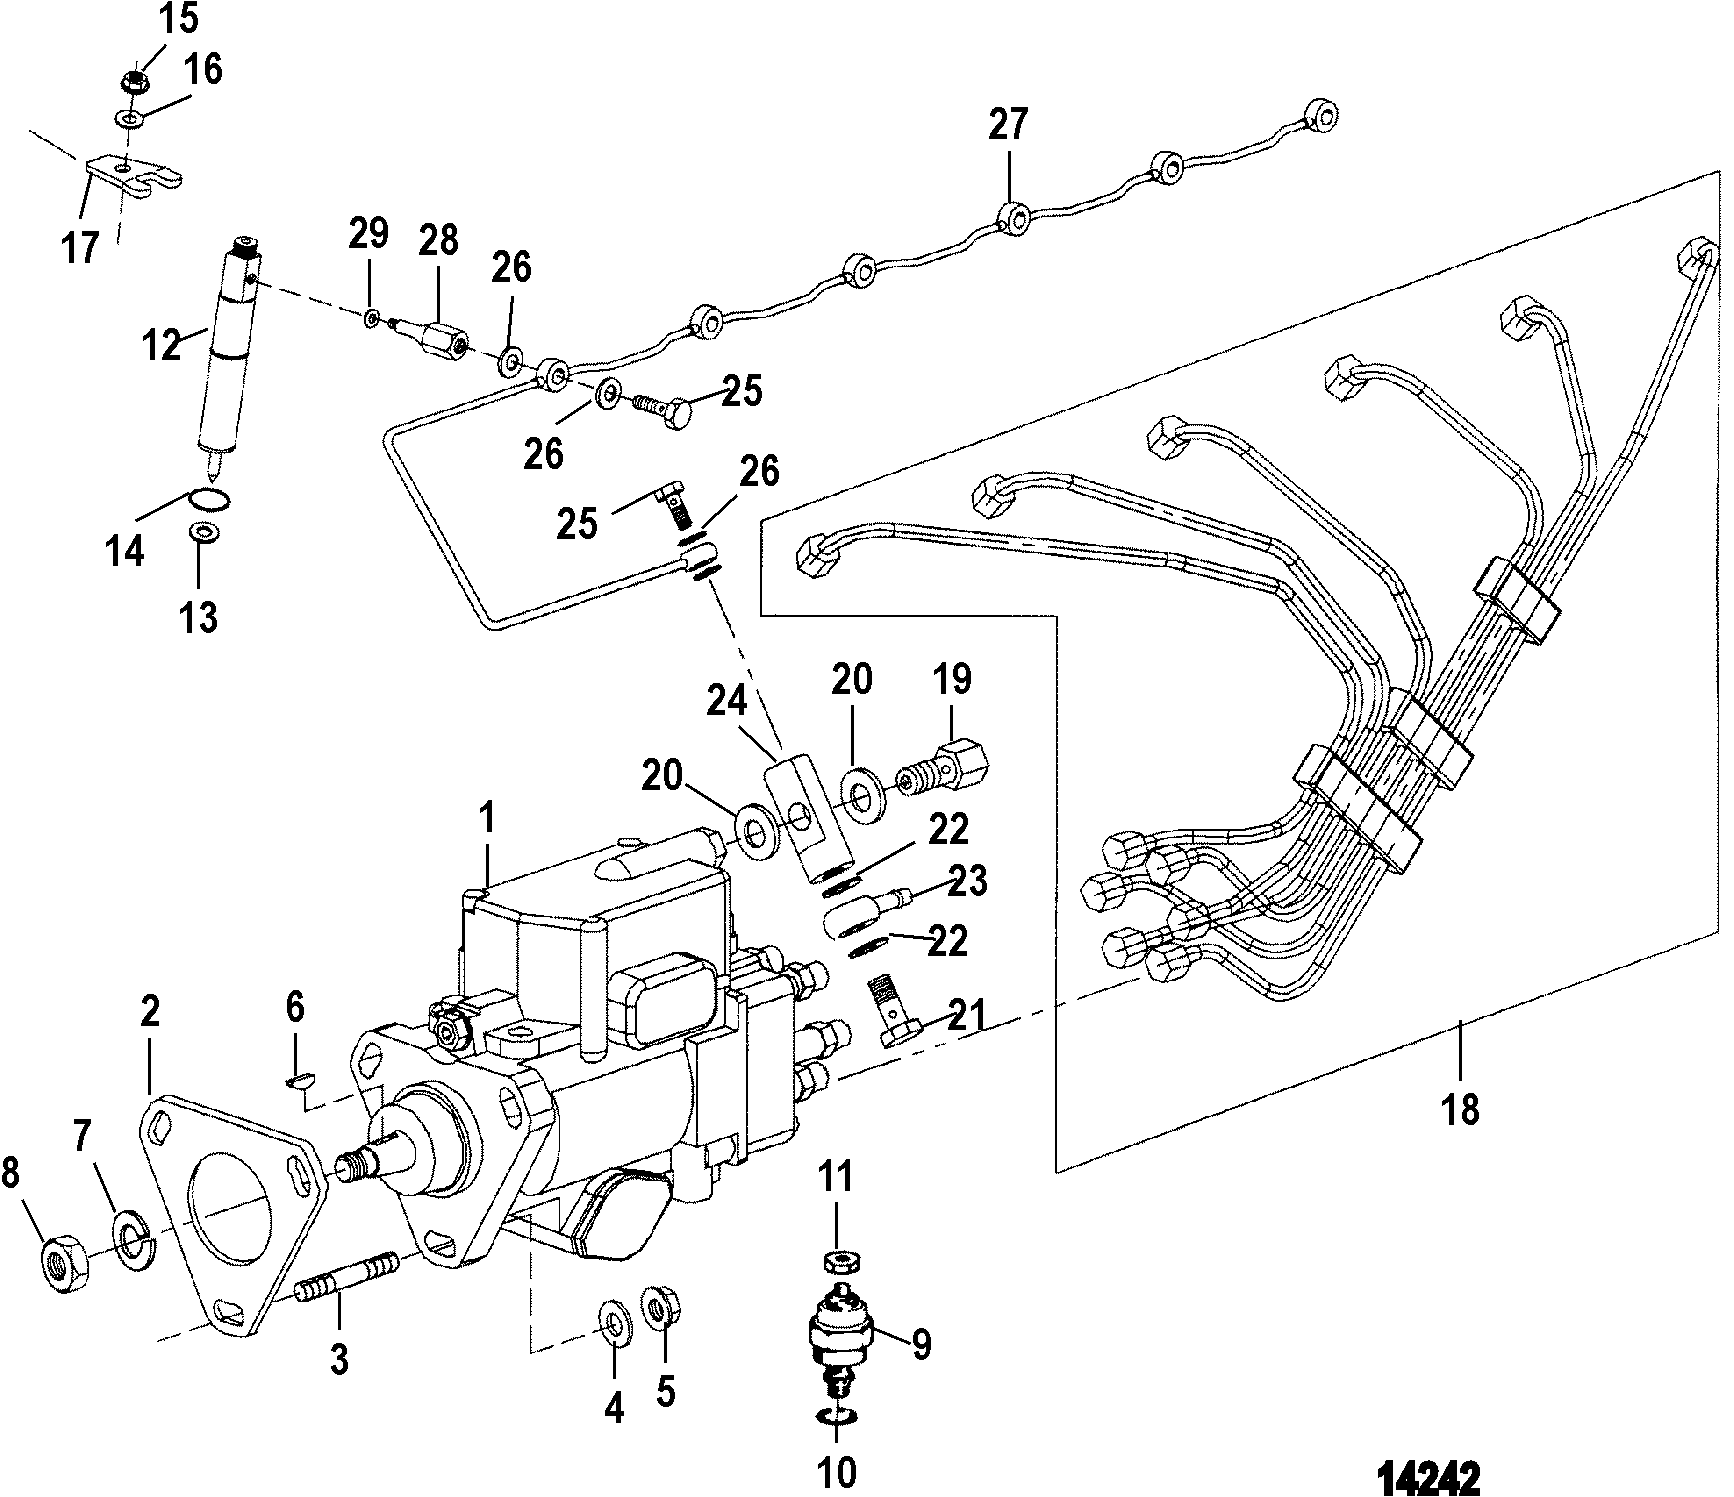 INJECTION PUMP, NOZZLE AND LINES